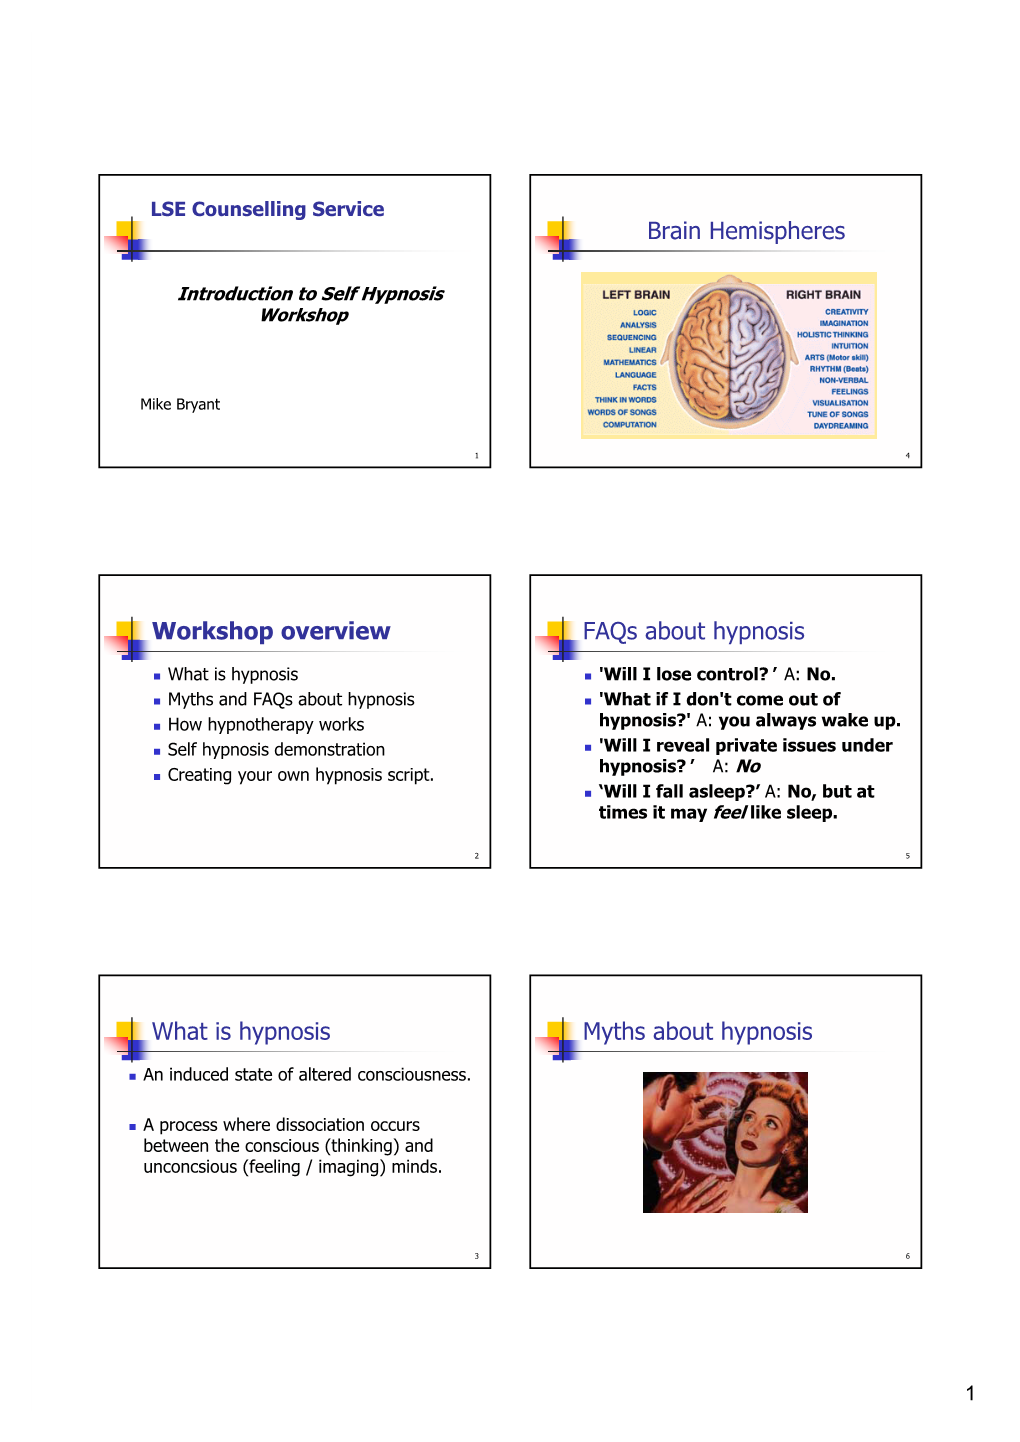 Workshop Overview What Is Hypnosis Brain Hemispheres Faqs About Hypnosis Myths About Hypnosis